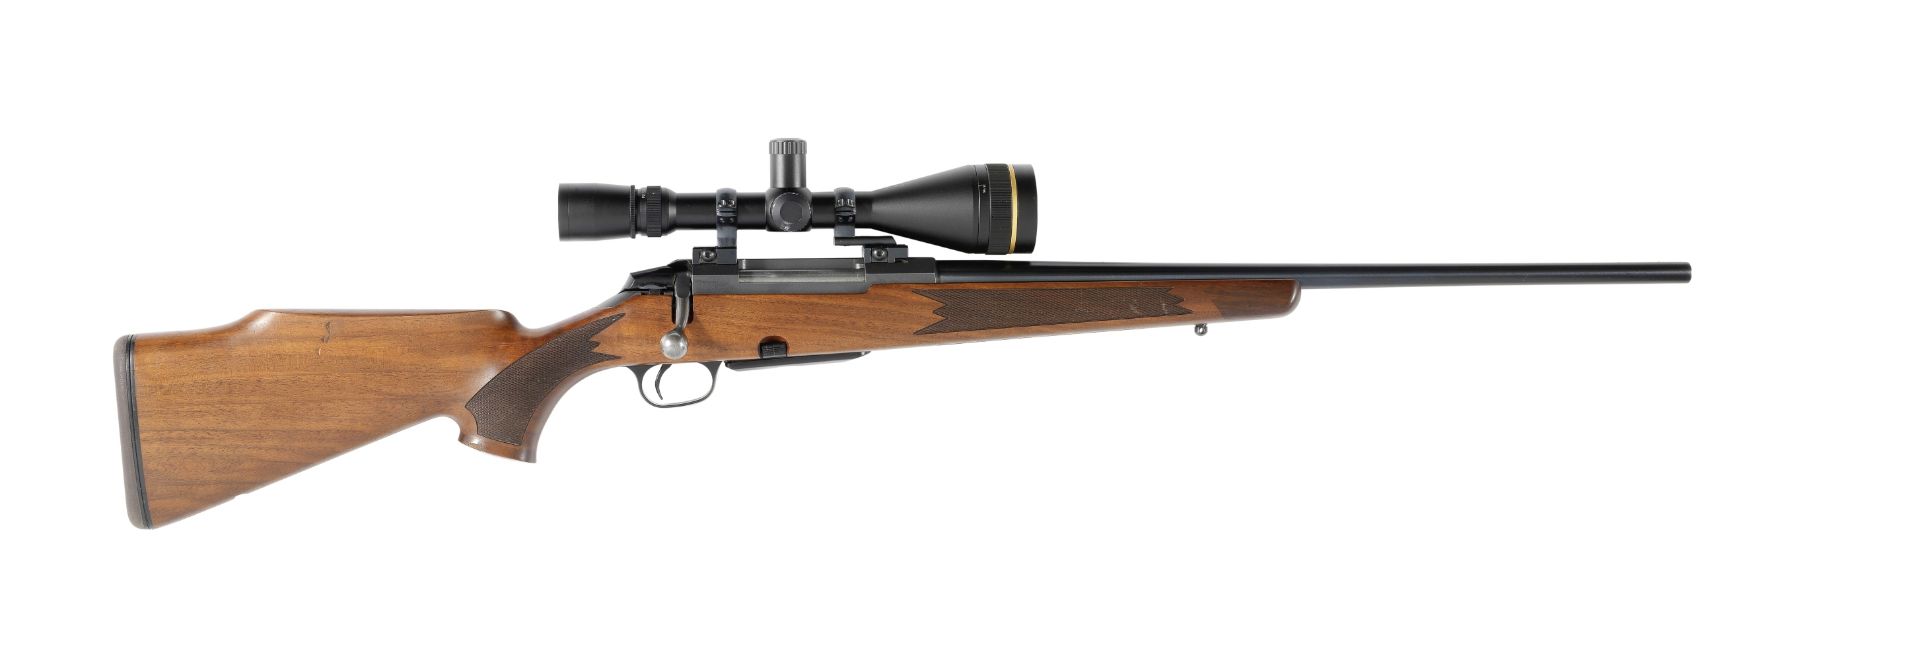 A 6.5x55 'M695' bolt-magazine rifle by Tikka, no. 908087 With a leather slip